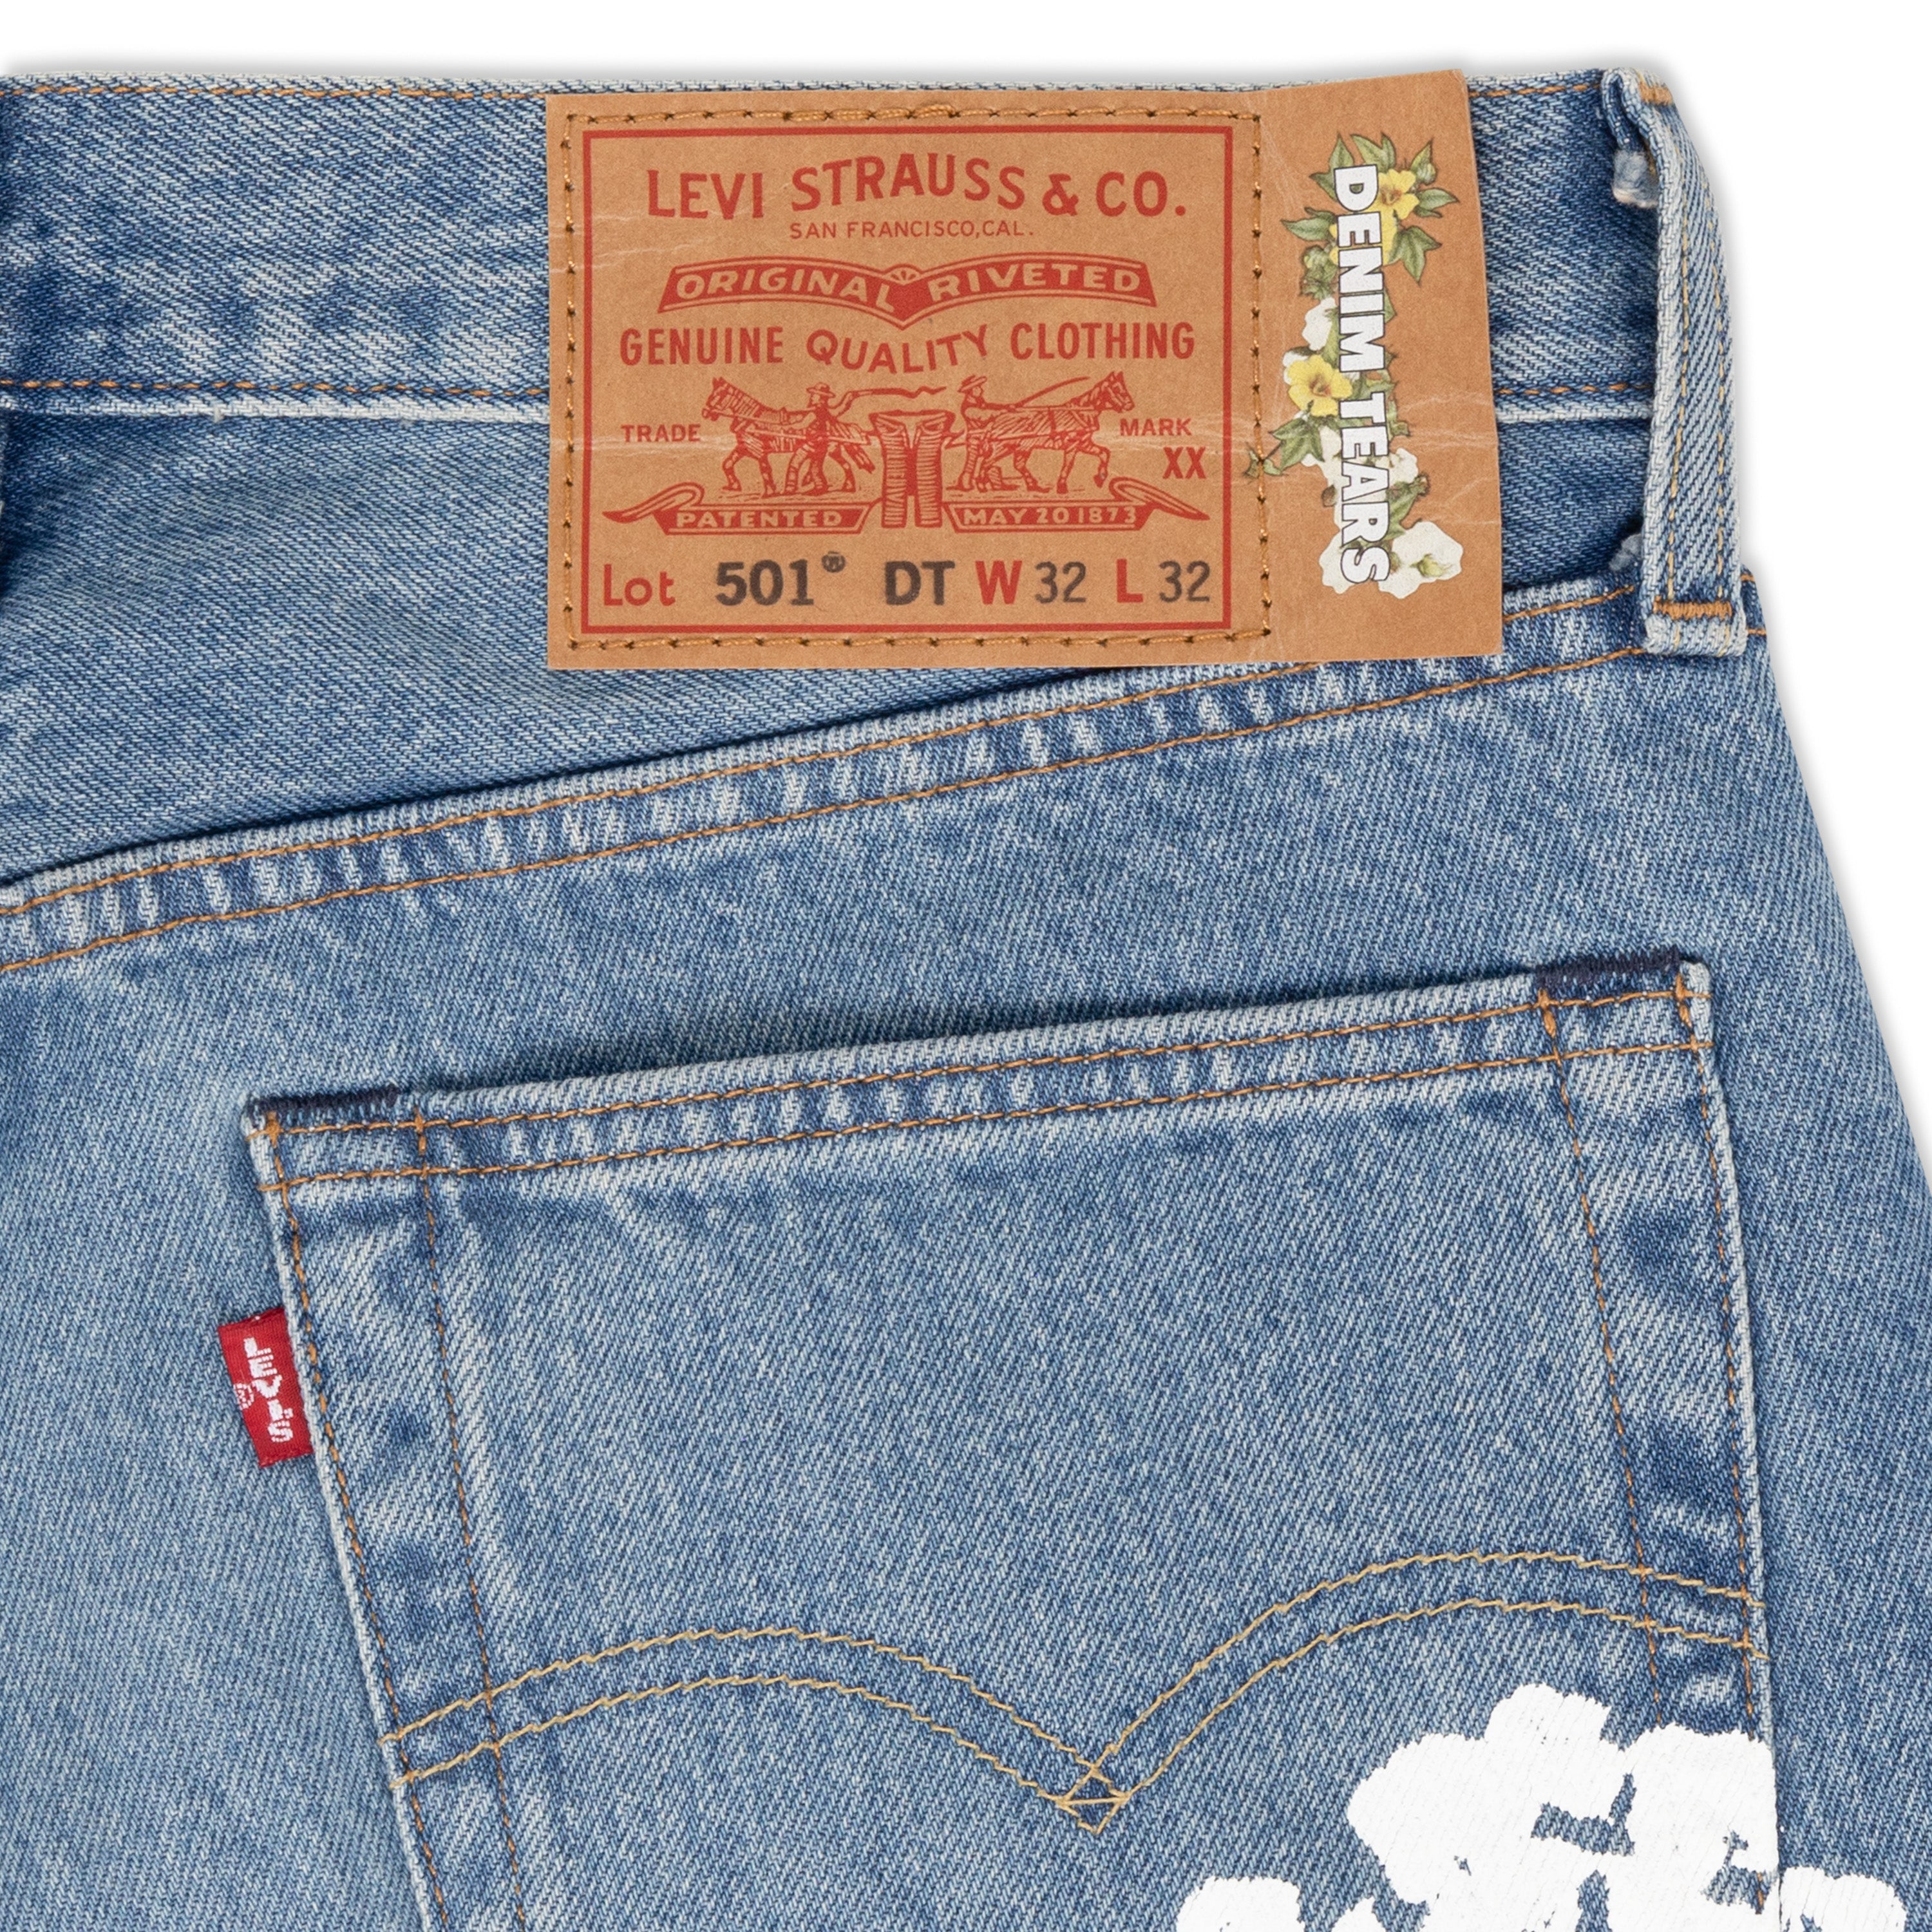 Wear And Tear Straight Jeans - Light Wash